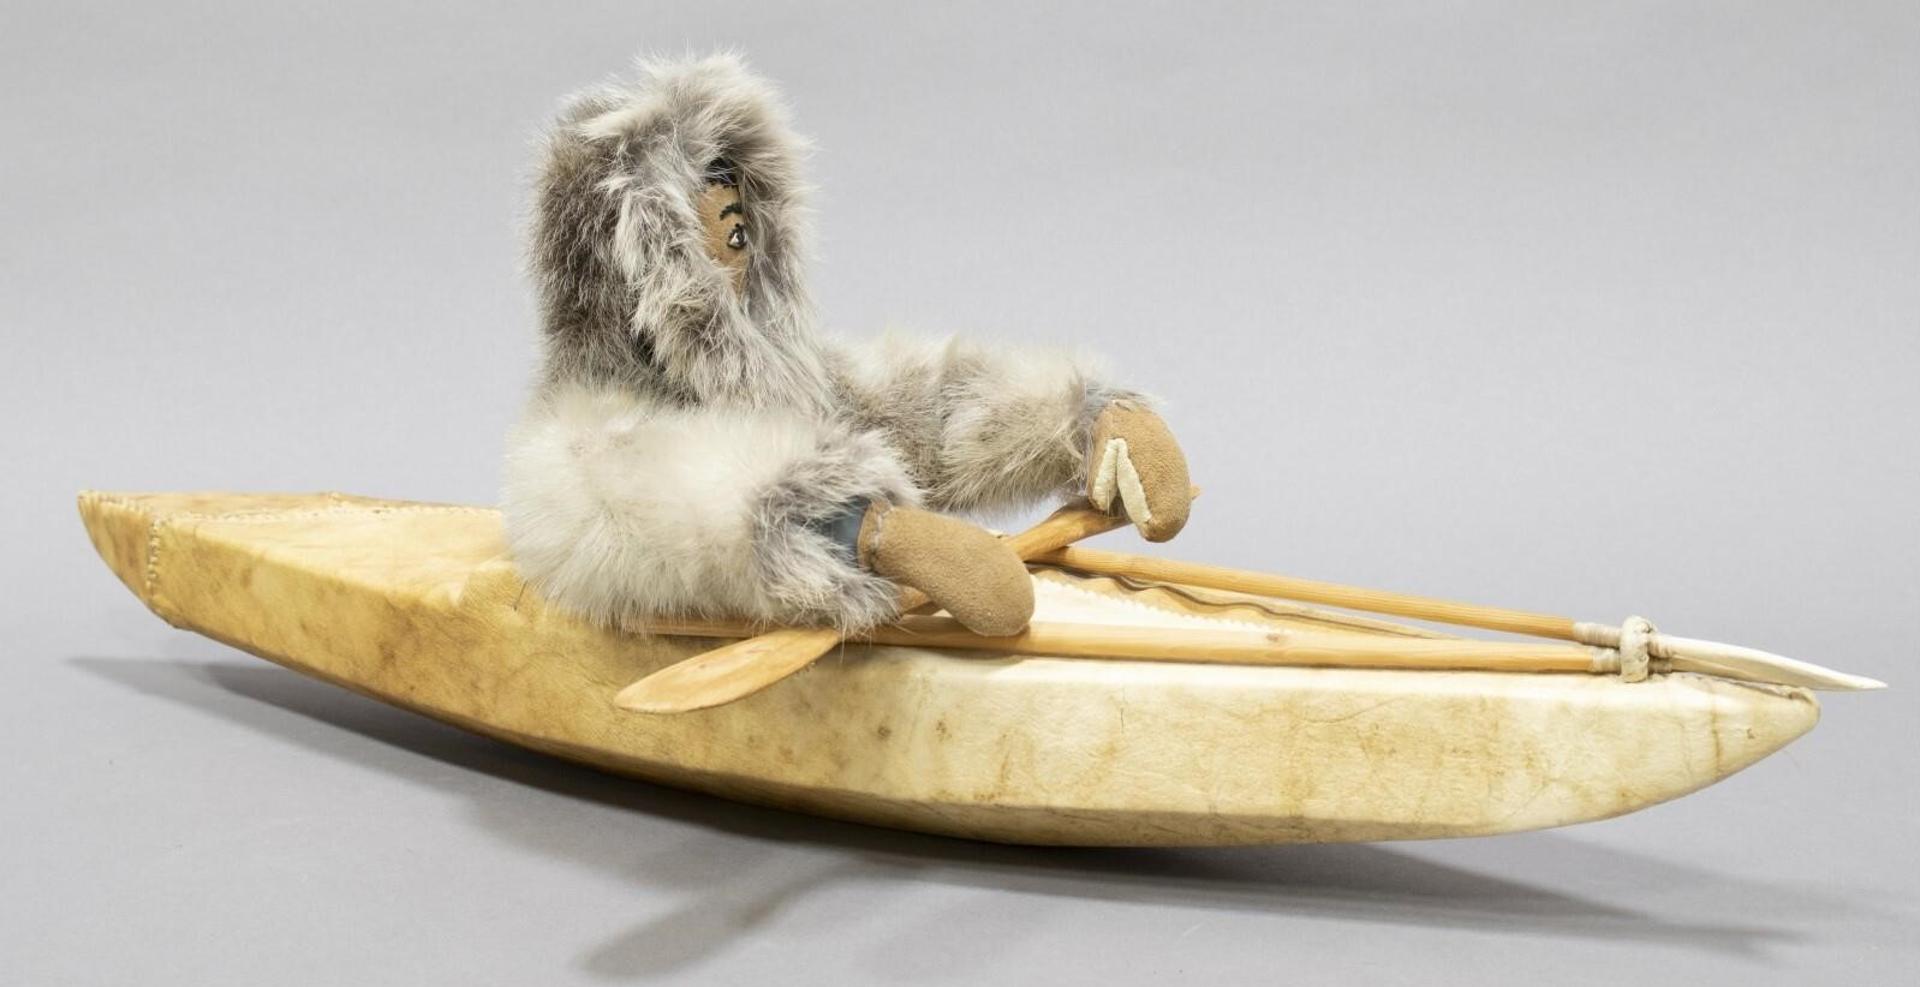 Inuit Model Kayak With Paddler - a sealskin covered wood-framed kayak containing a figure wearing a fur parka, deerskin gloves and holding a wooden paddle; with mounted wood, bone and sinew spears